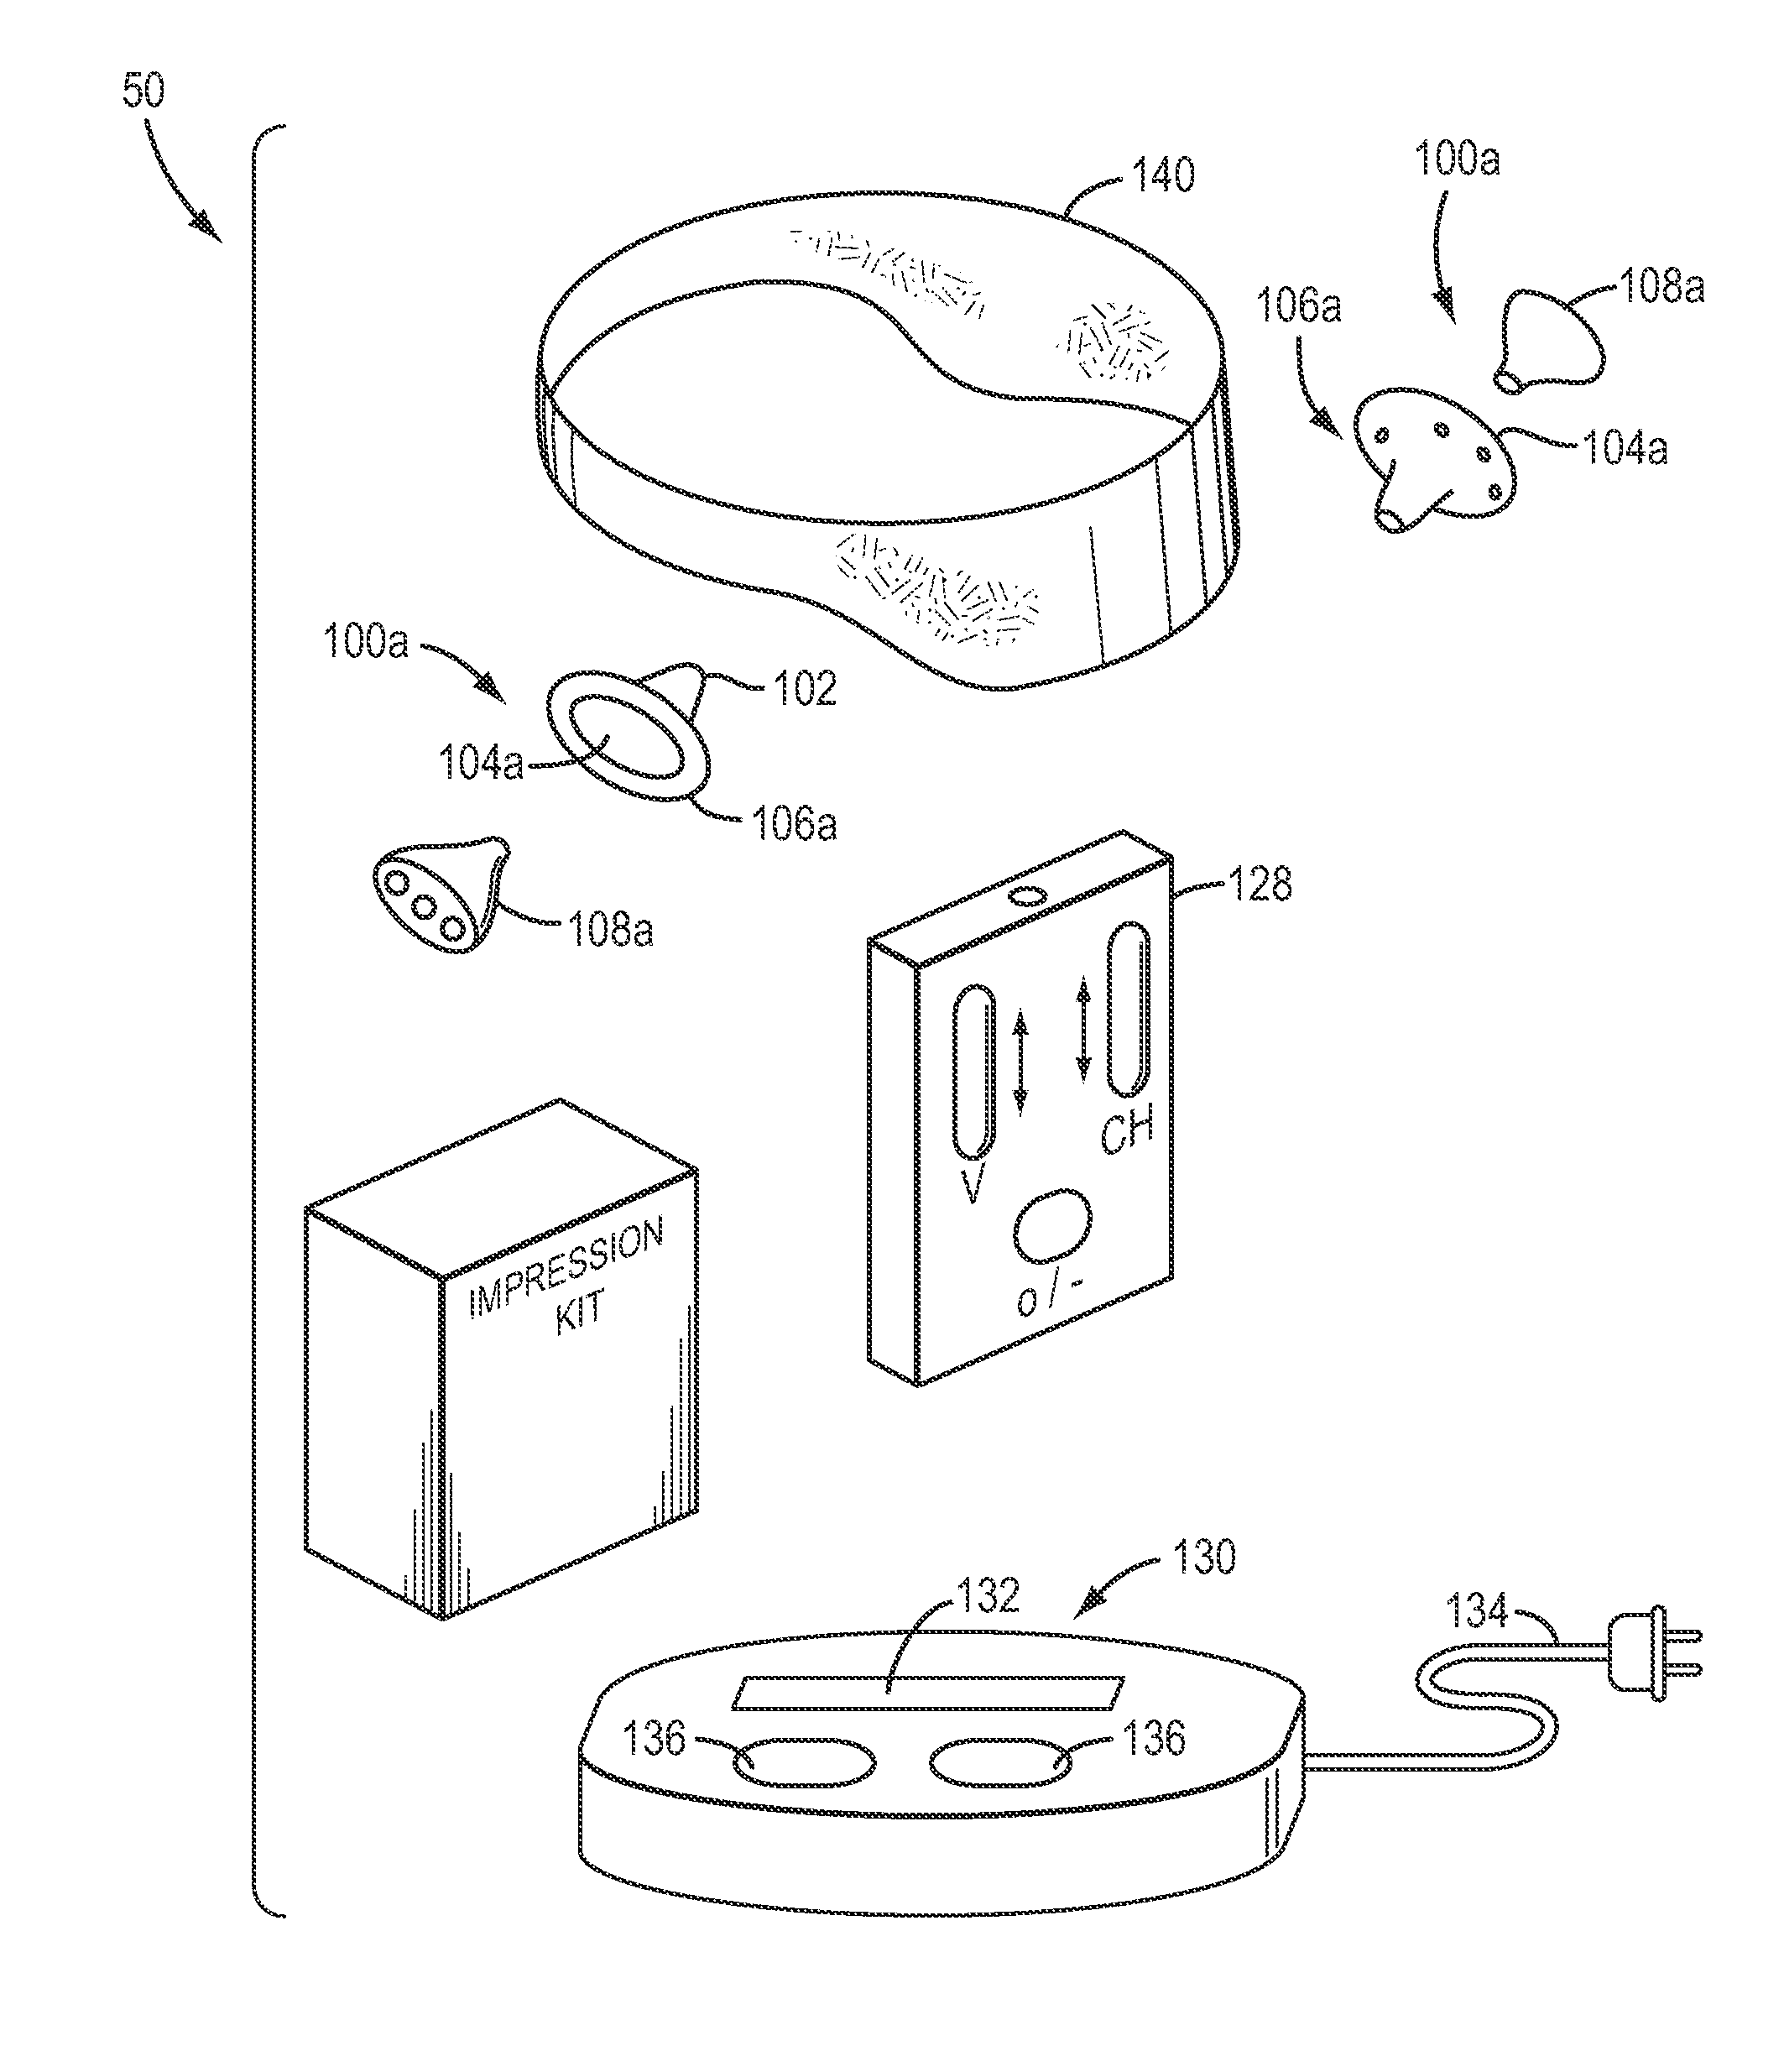 Ear plug devices, methods and kits for the induction and maintenance of quality of sleep